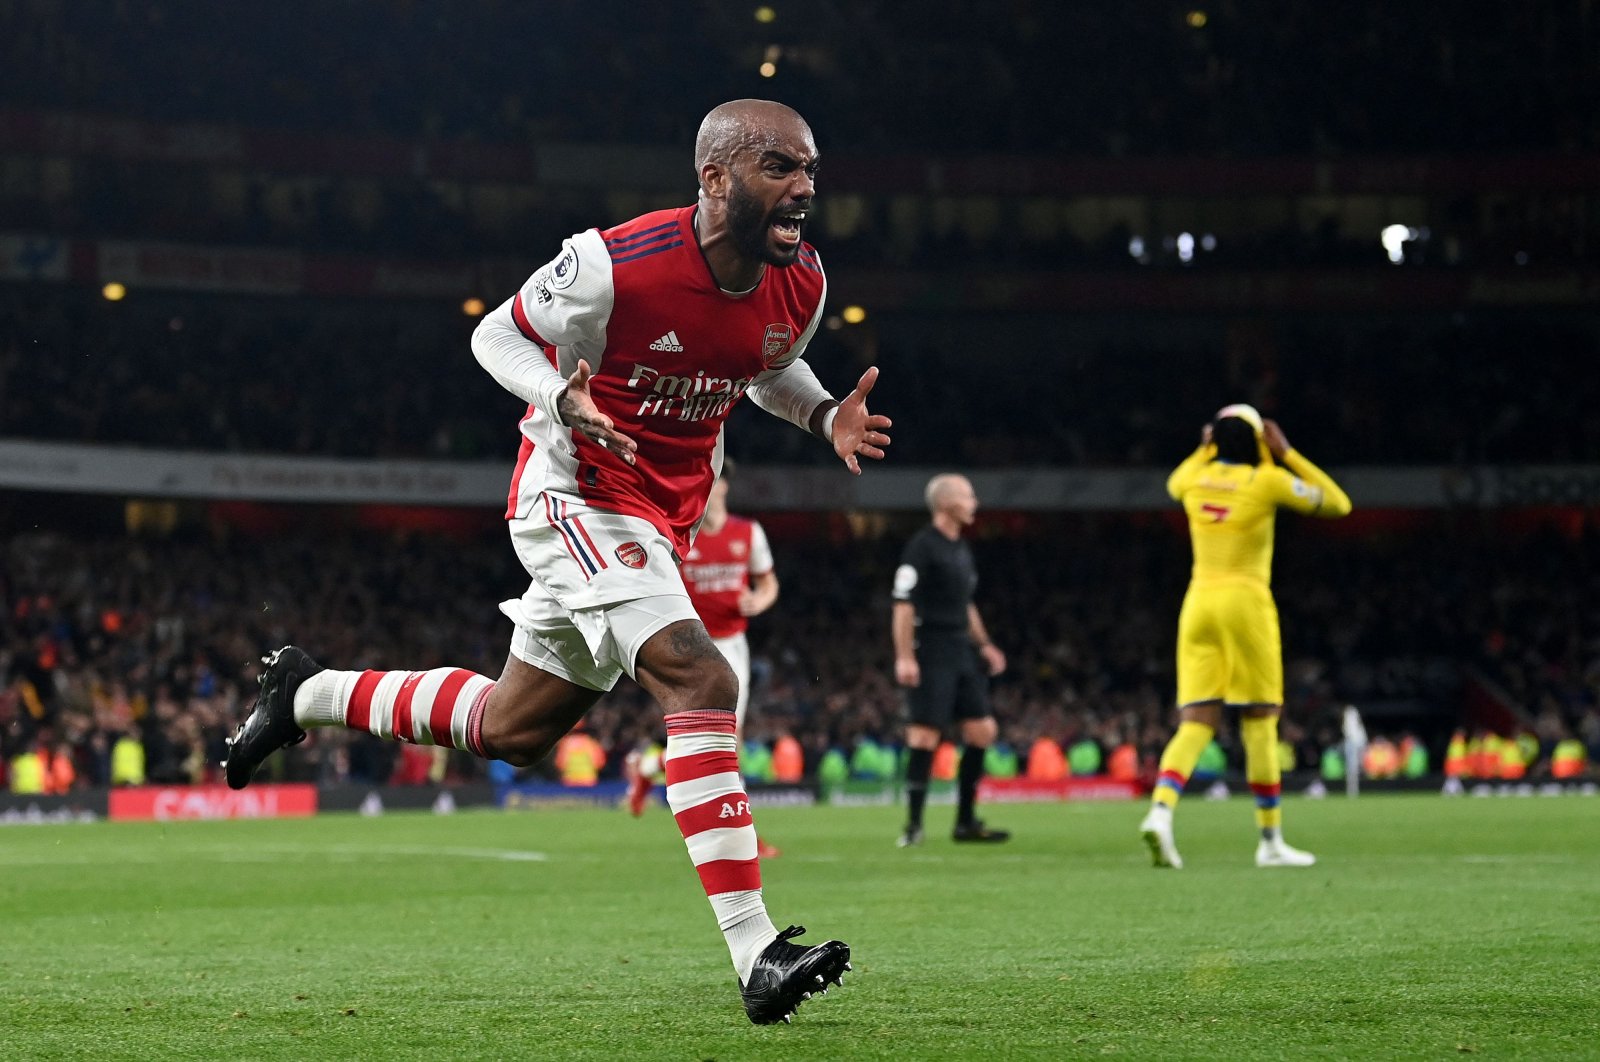 Arsenal's Alexandre Lacazette celebrates scoring his team's second goal during a Premier League match against Crystal Palace at the Emirates, London, England, Oct. 18, 2021. (AFP Photo)